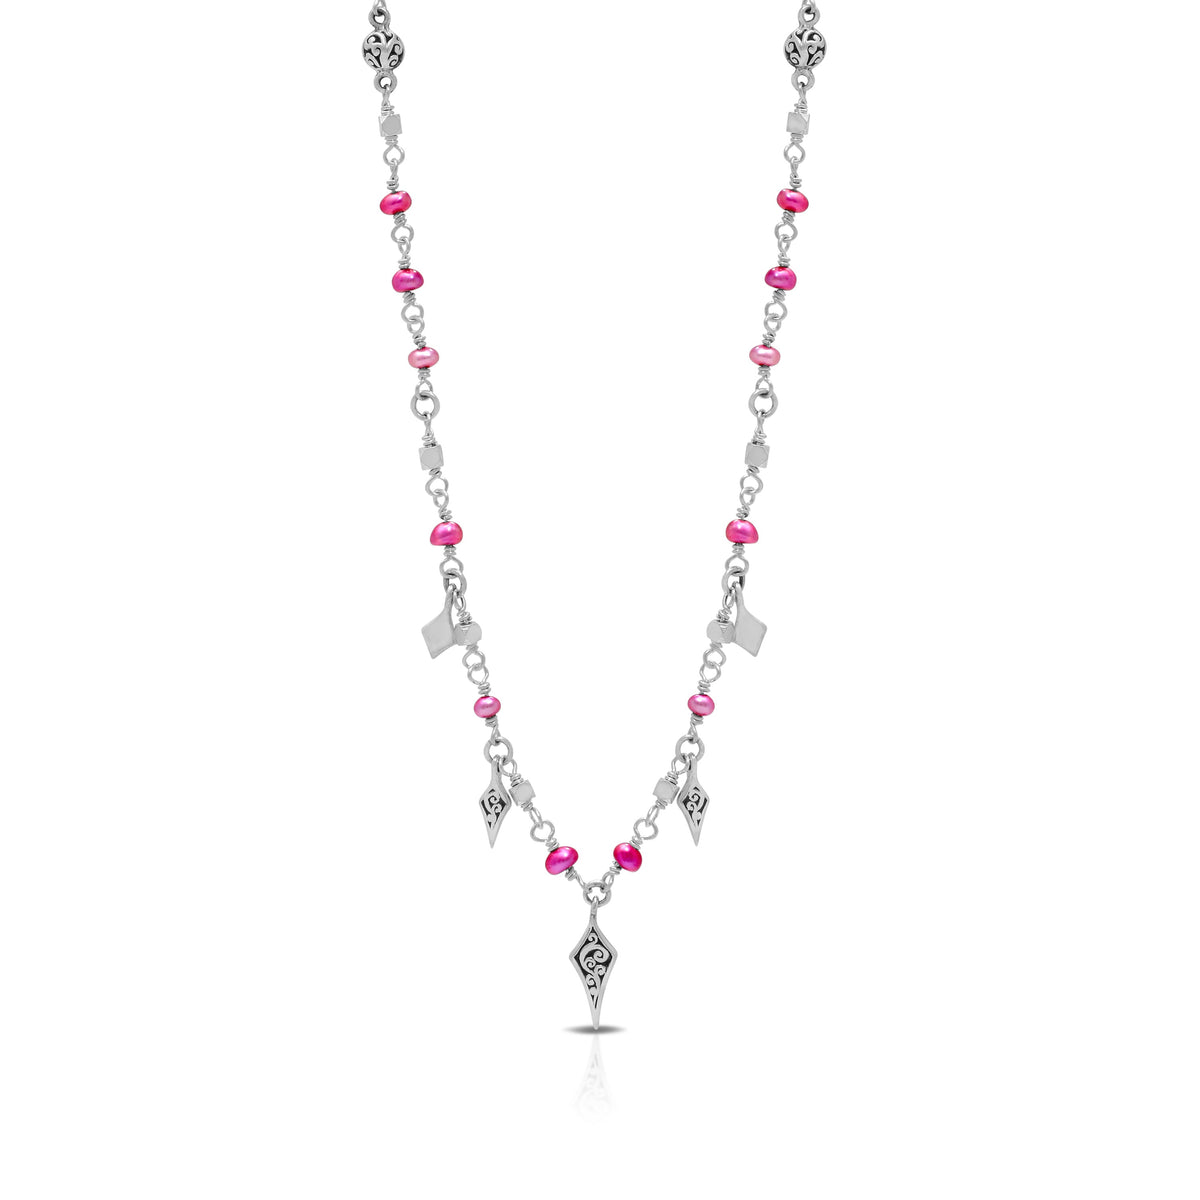 Pink Pearl Beads (4mm) & LH Scroll Beads Diamond-Shaped Charm with Delicate Single Strand Necklace (17"- 20")